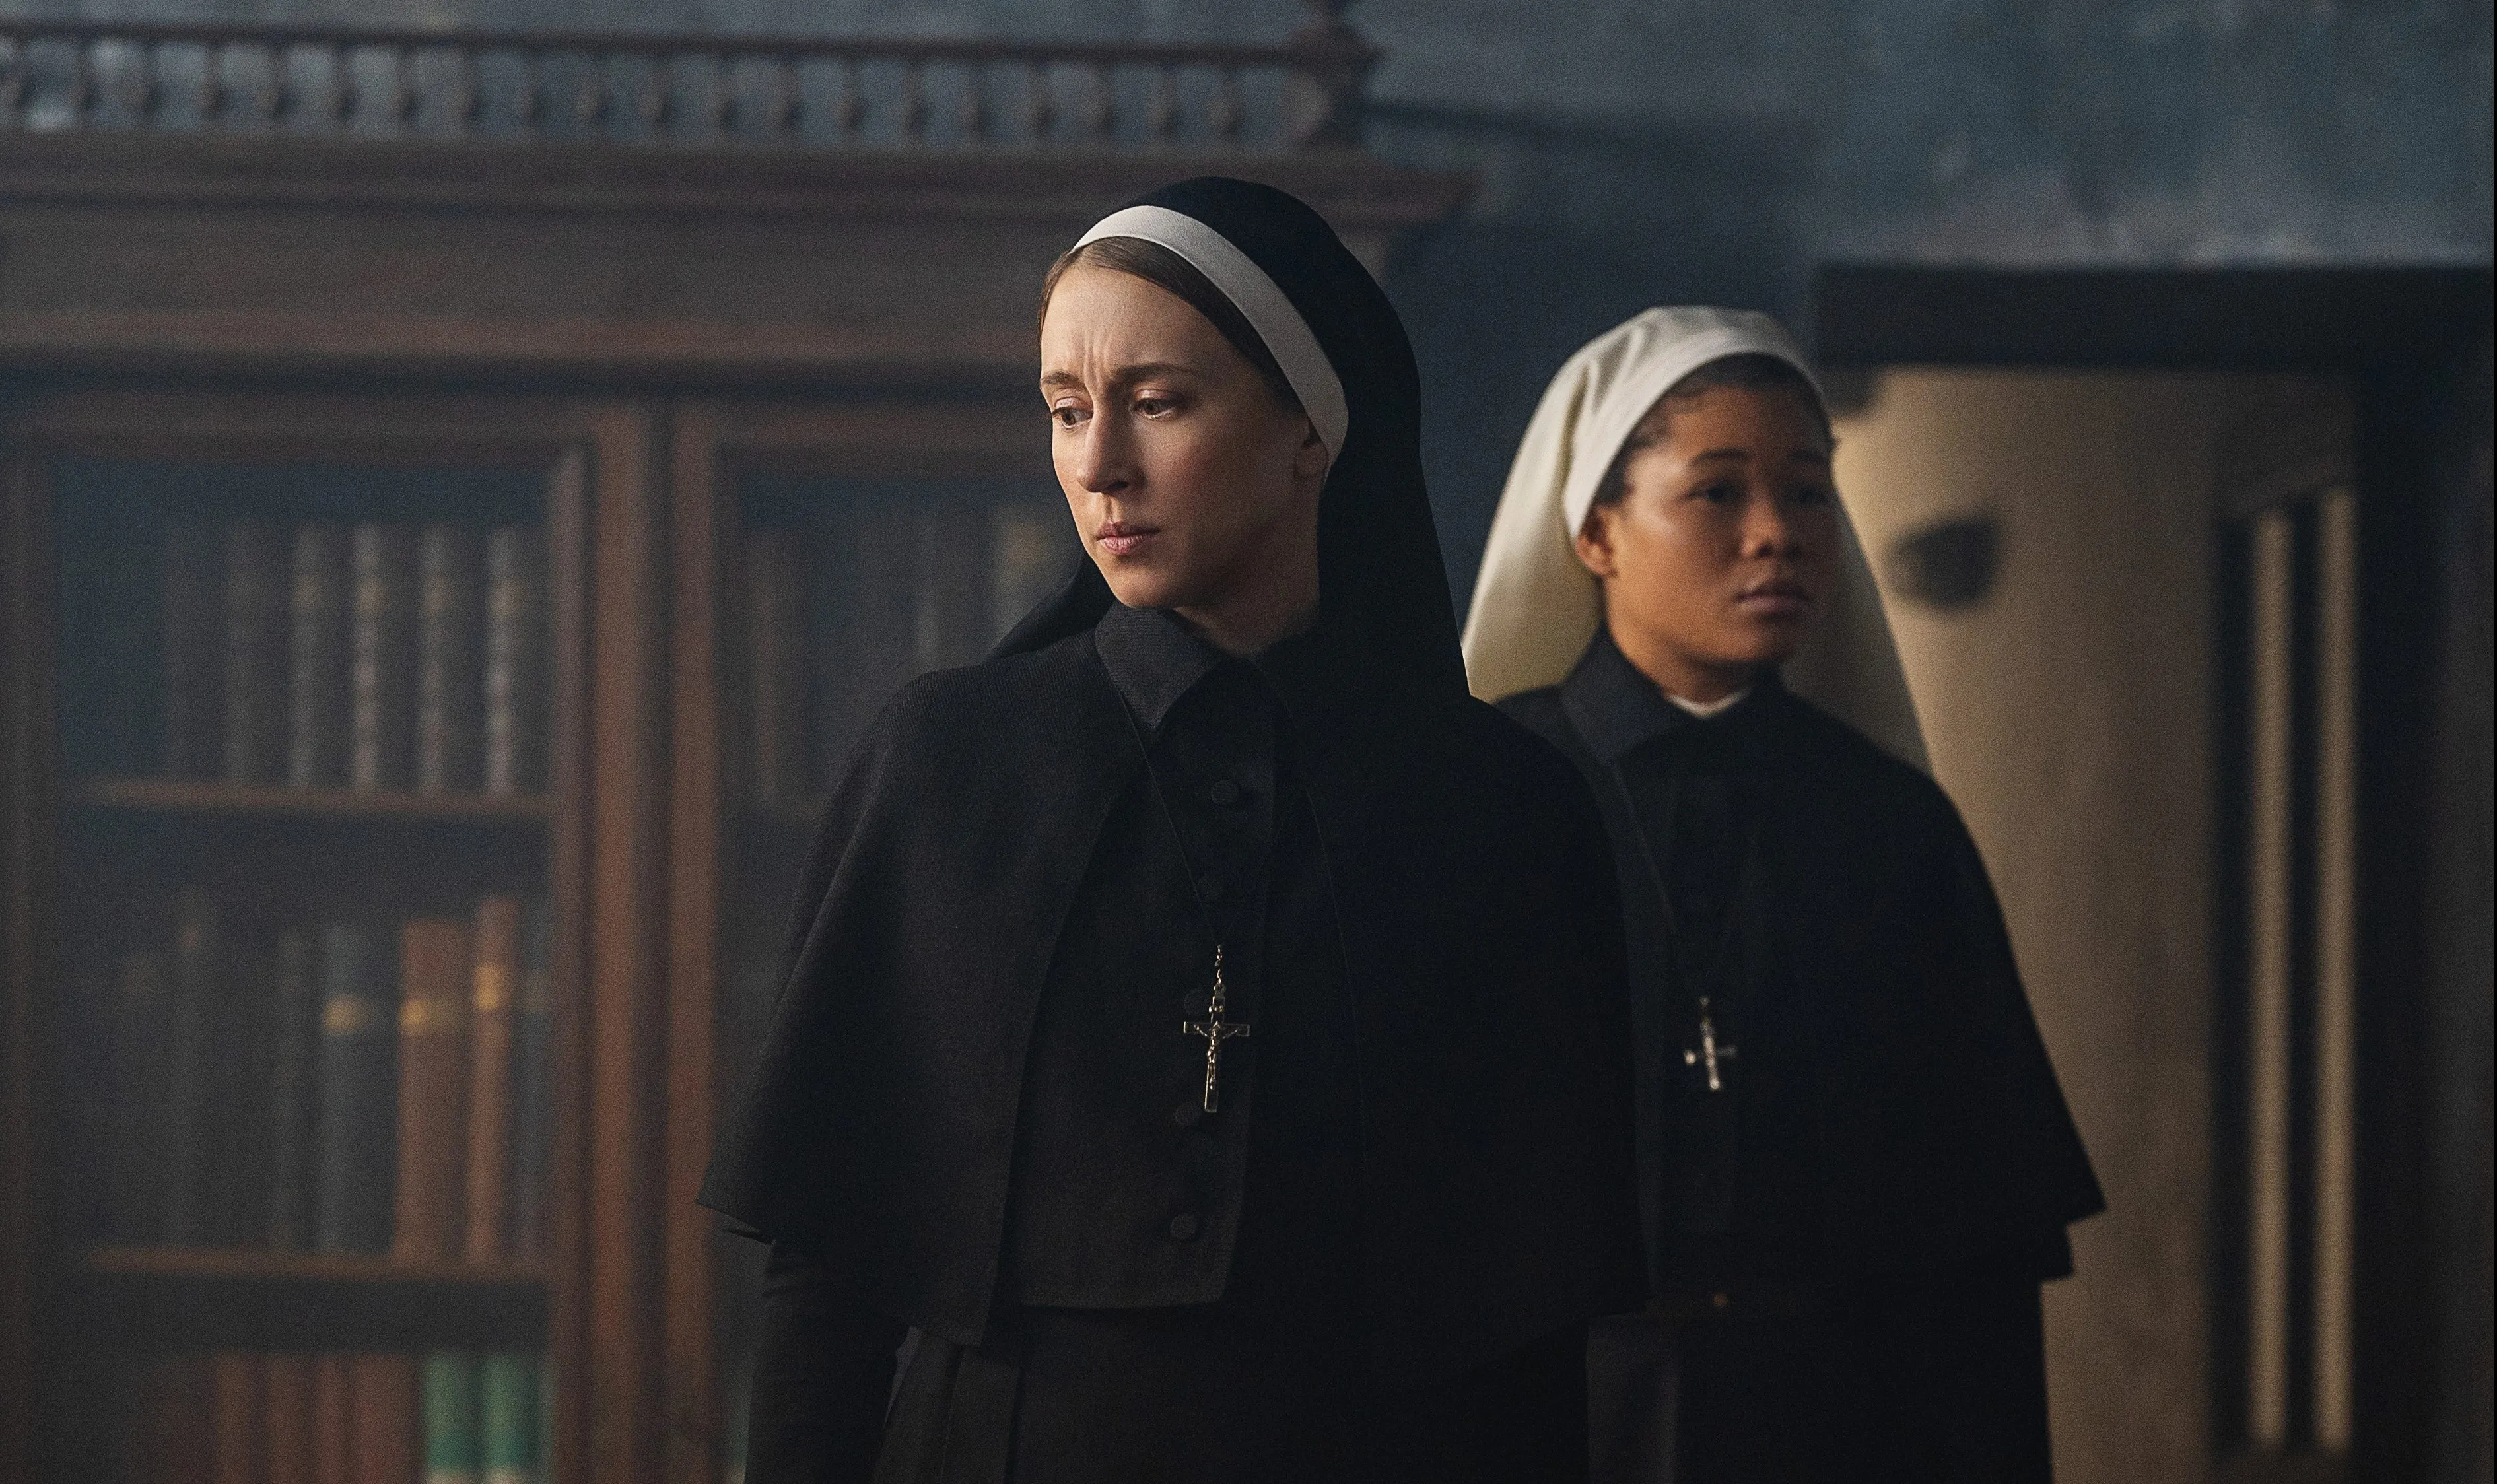 The Nun II Review: Scares Up Success as a Worthy Sequel in the Conjuring Universe